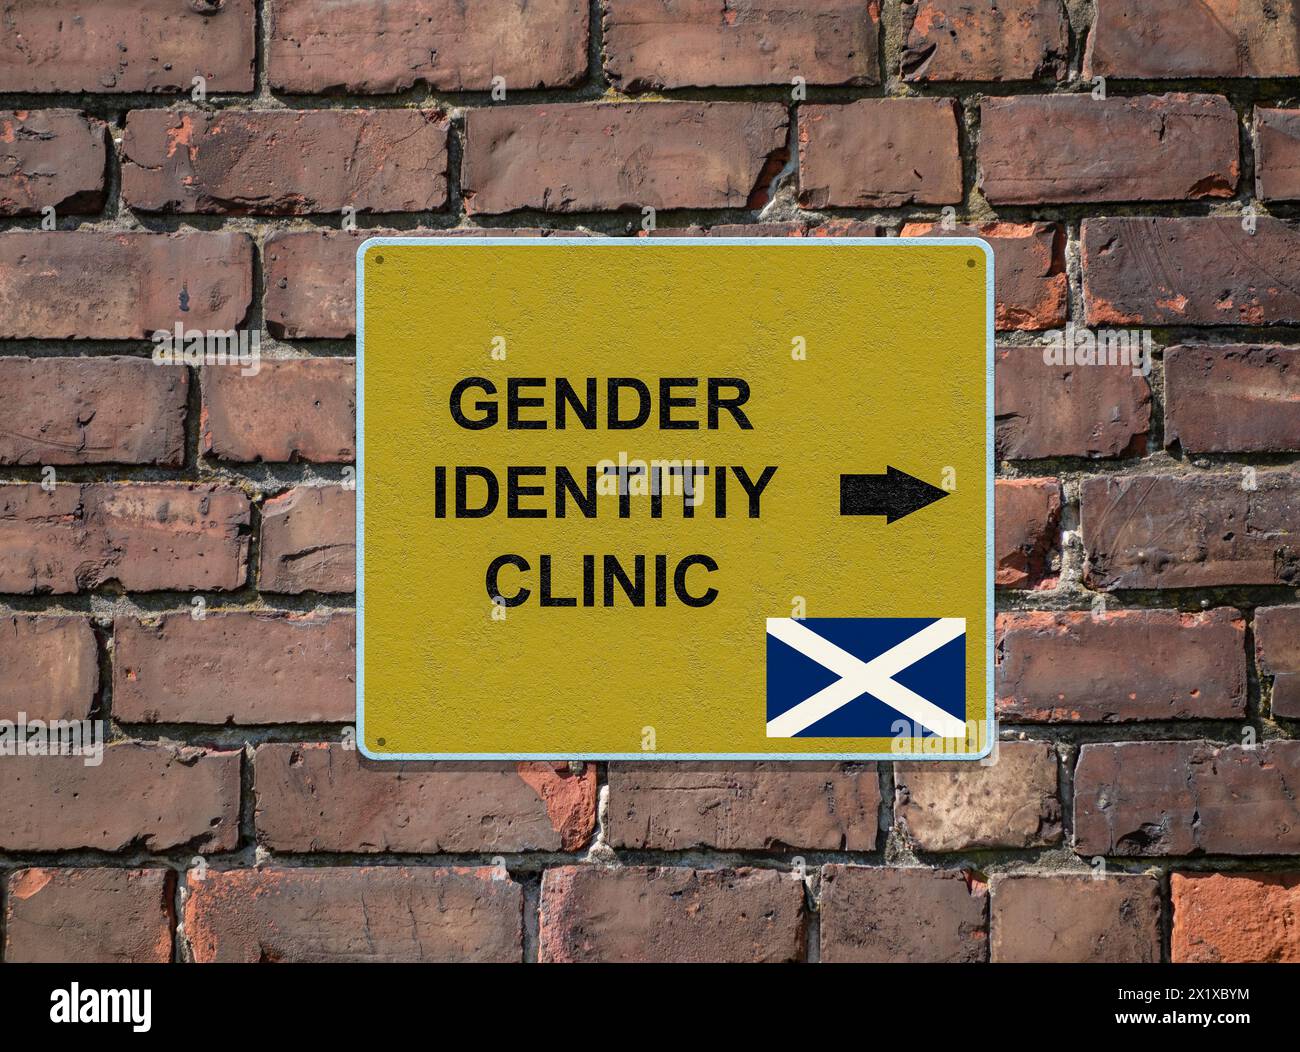 Gender identity clinic sign with flag of Scotland. Composite concept image. Stock Photo